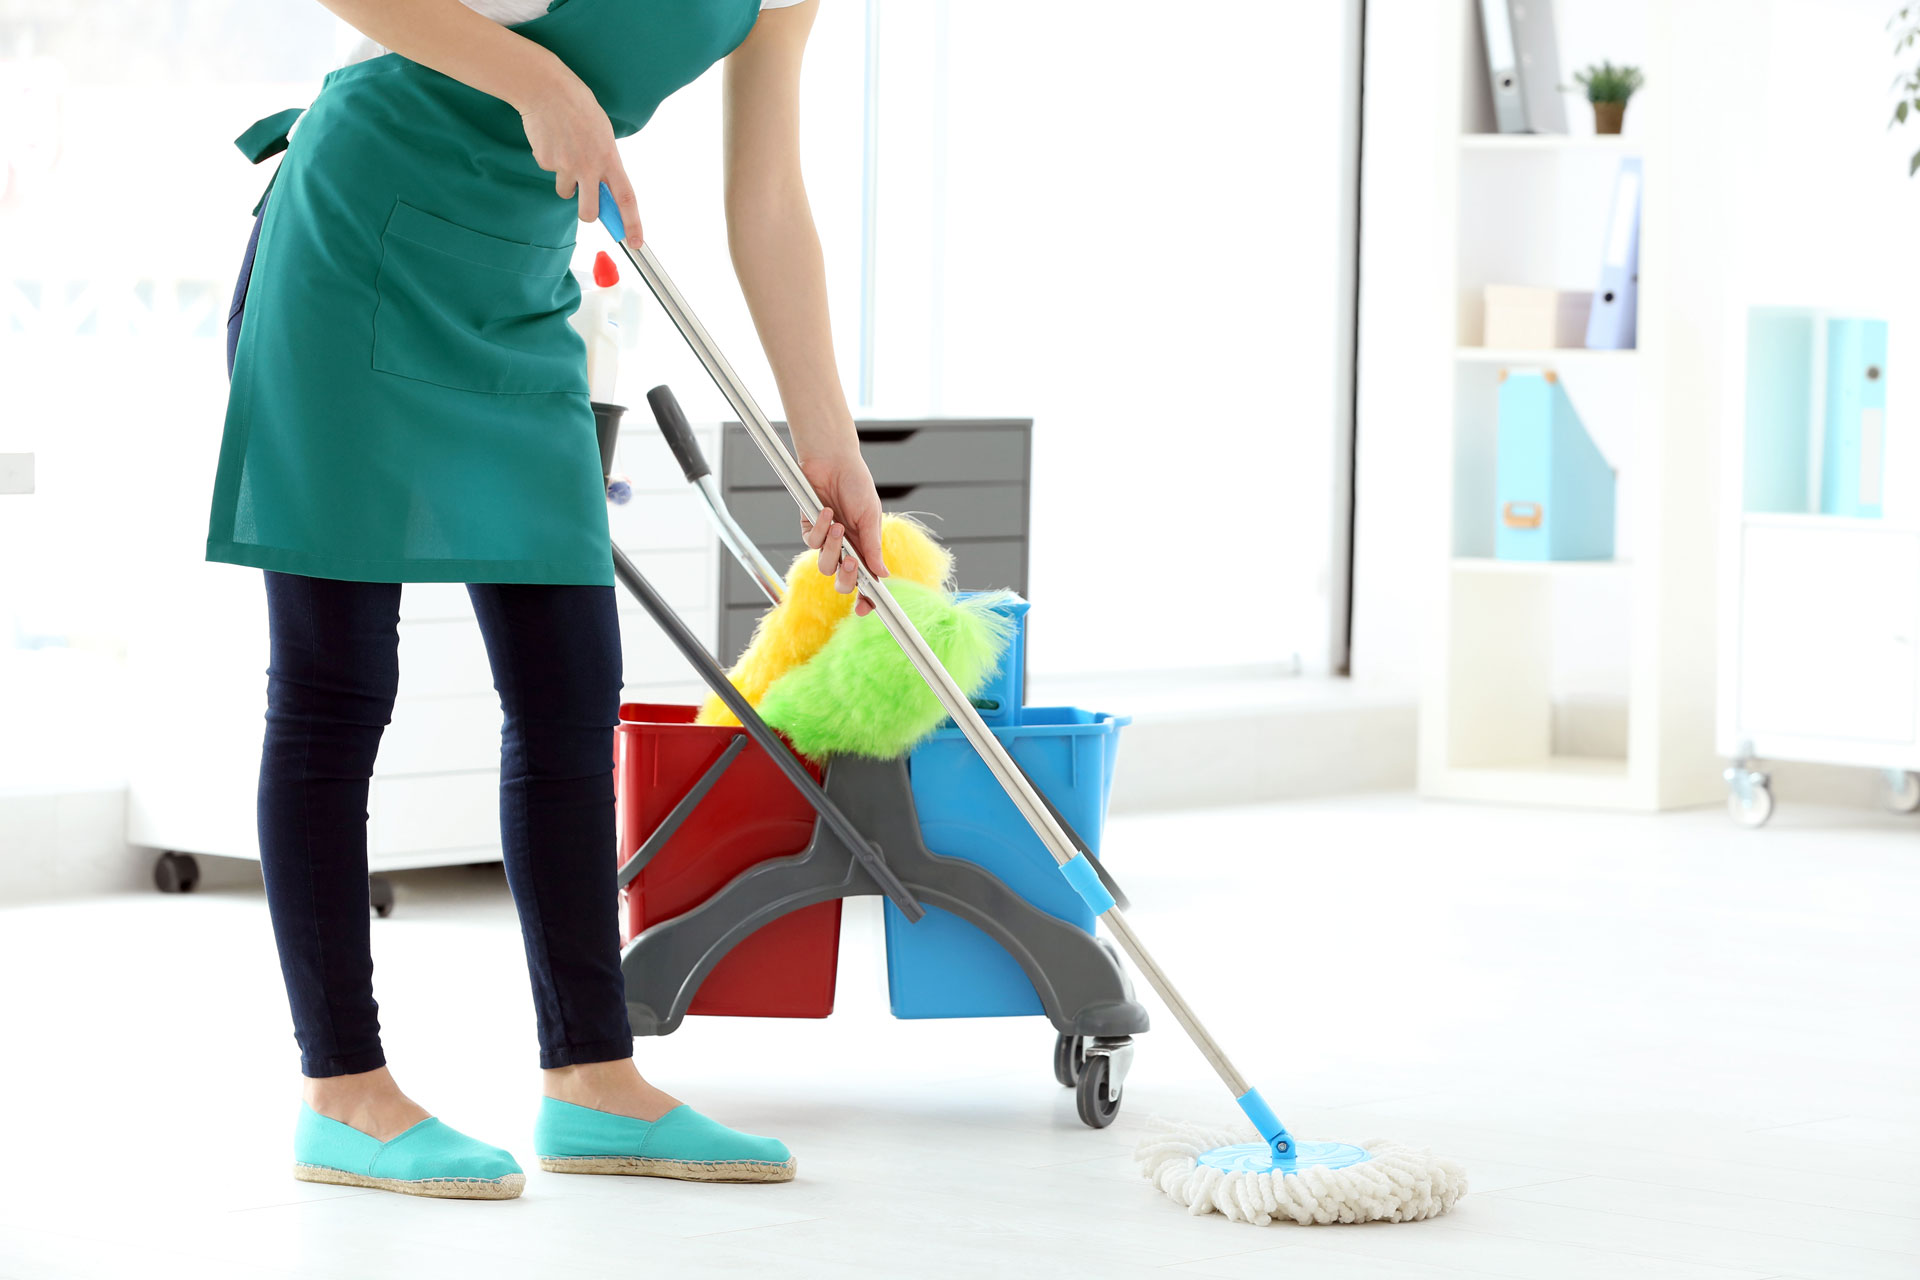 Commercial cleaning service